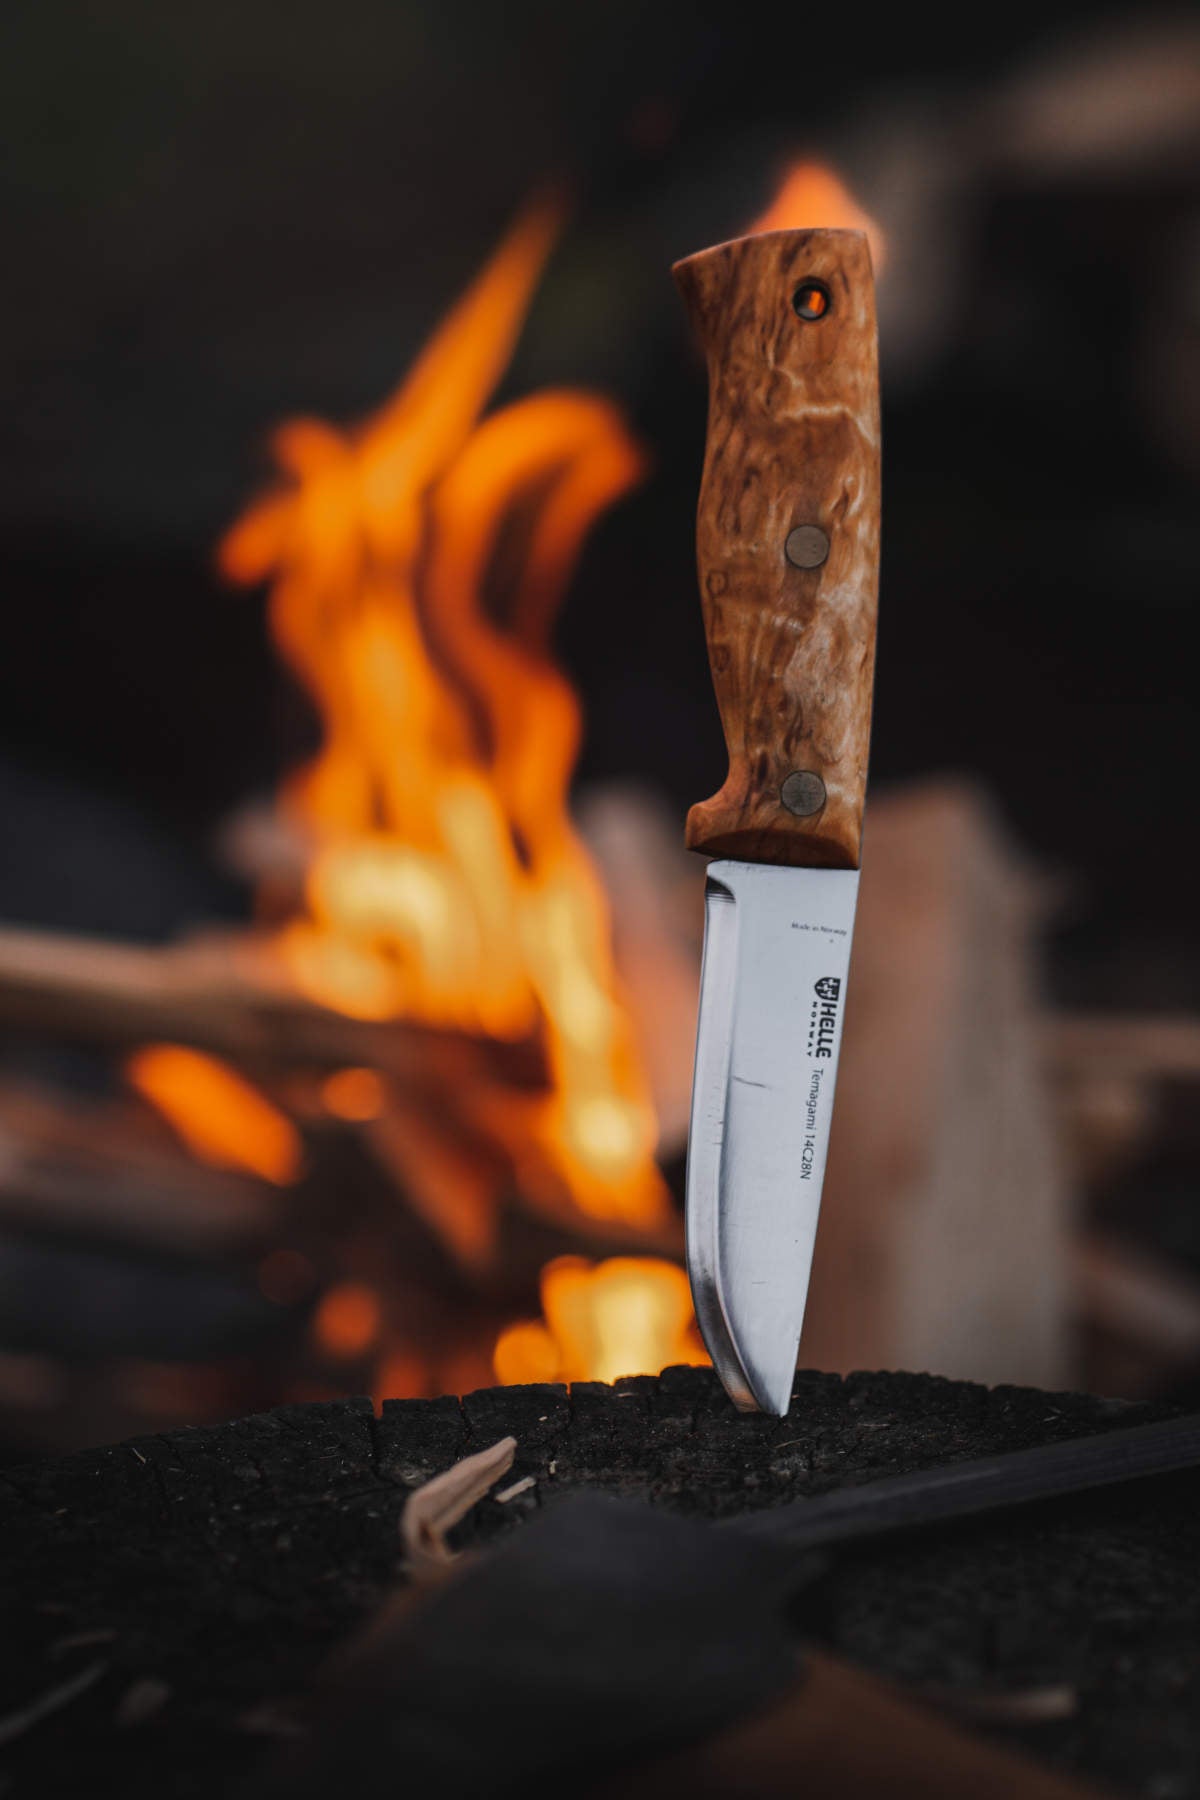 Temagami 14C28N - Design by Les Stroud – Helle Knives